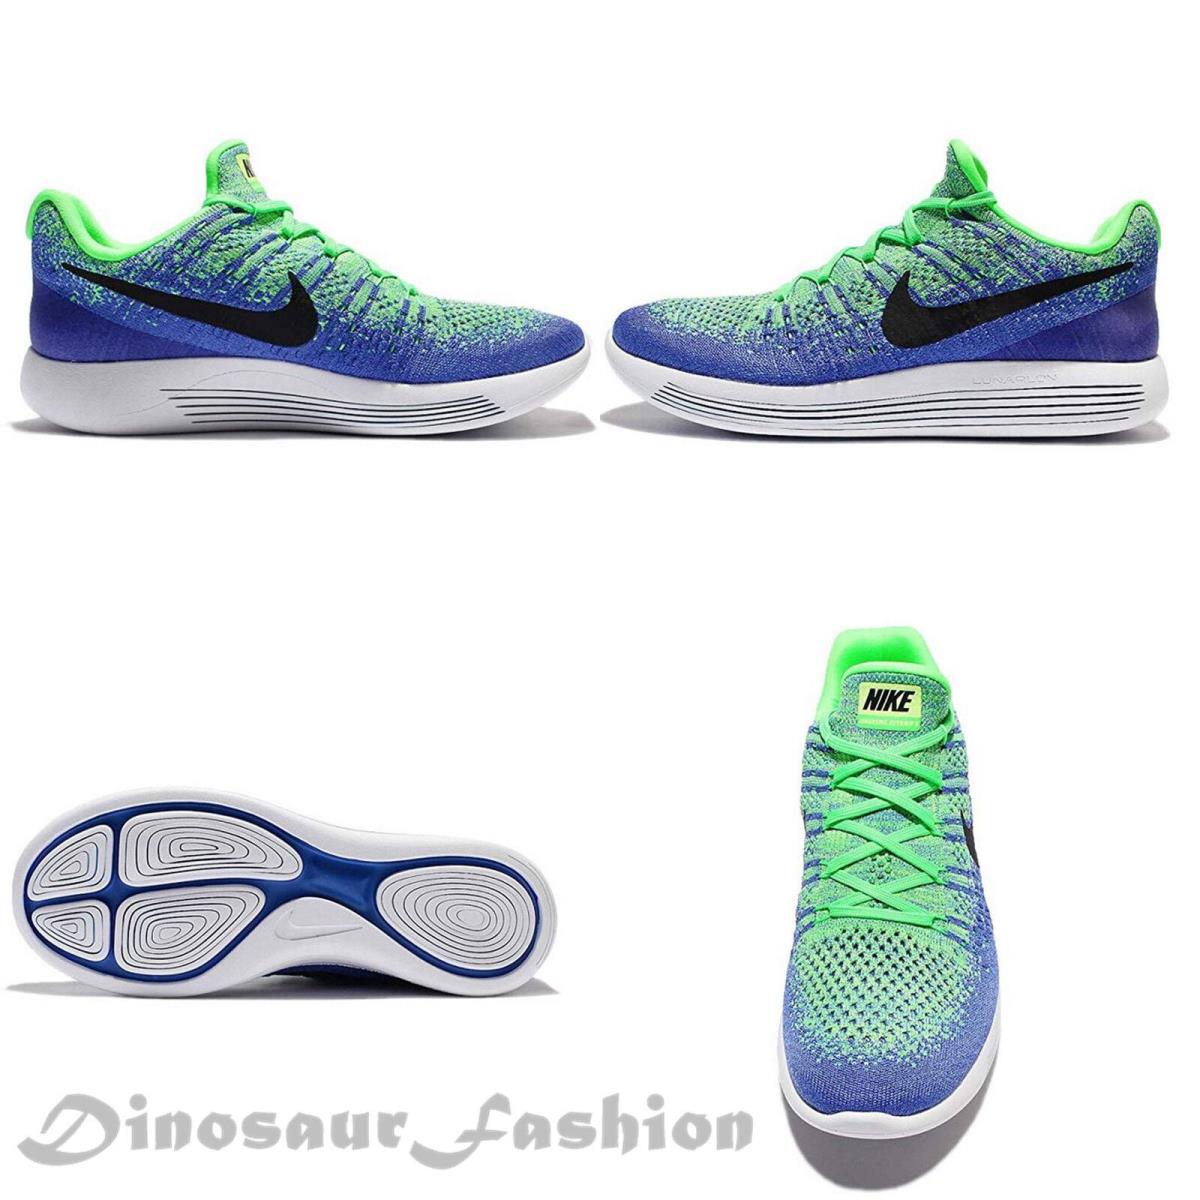 Nike Lunarepic Low Flyknit 2 GS <869990-301> Women`s Running Shoes.new with Box - ELECTRO GREEN/BLACK